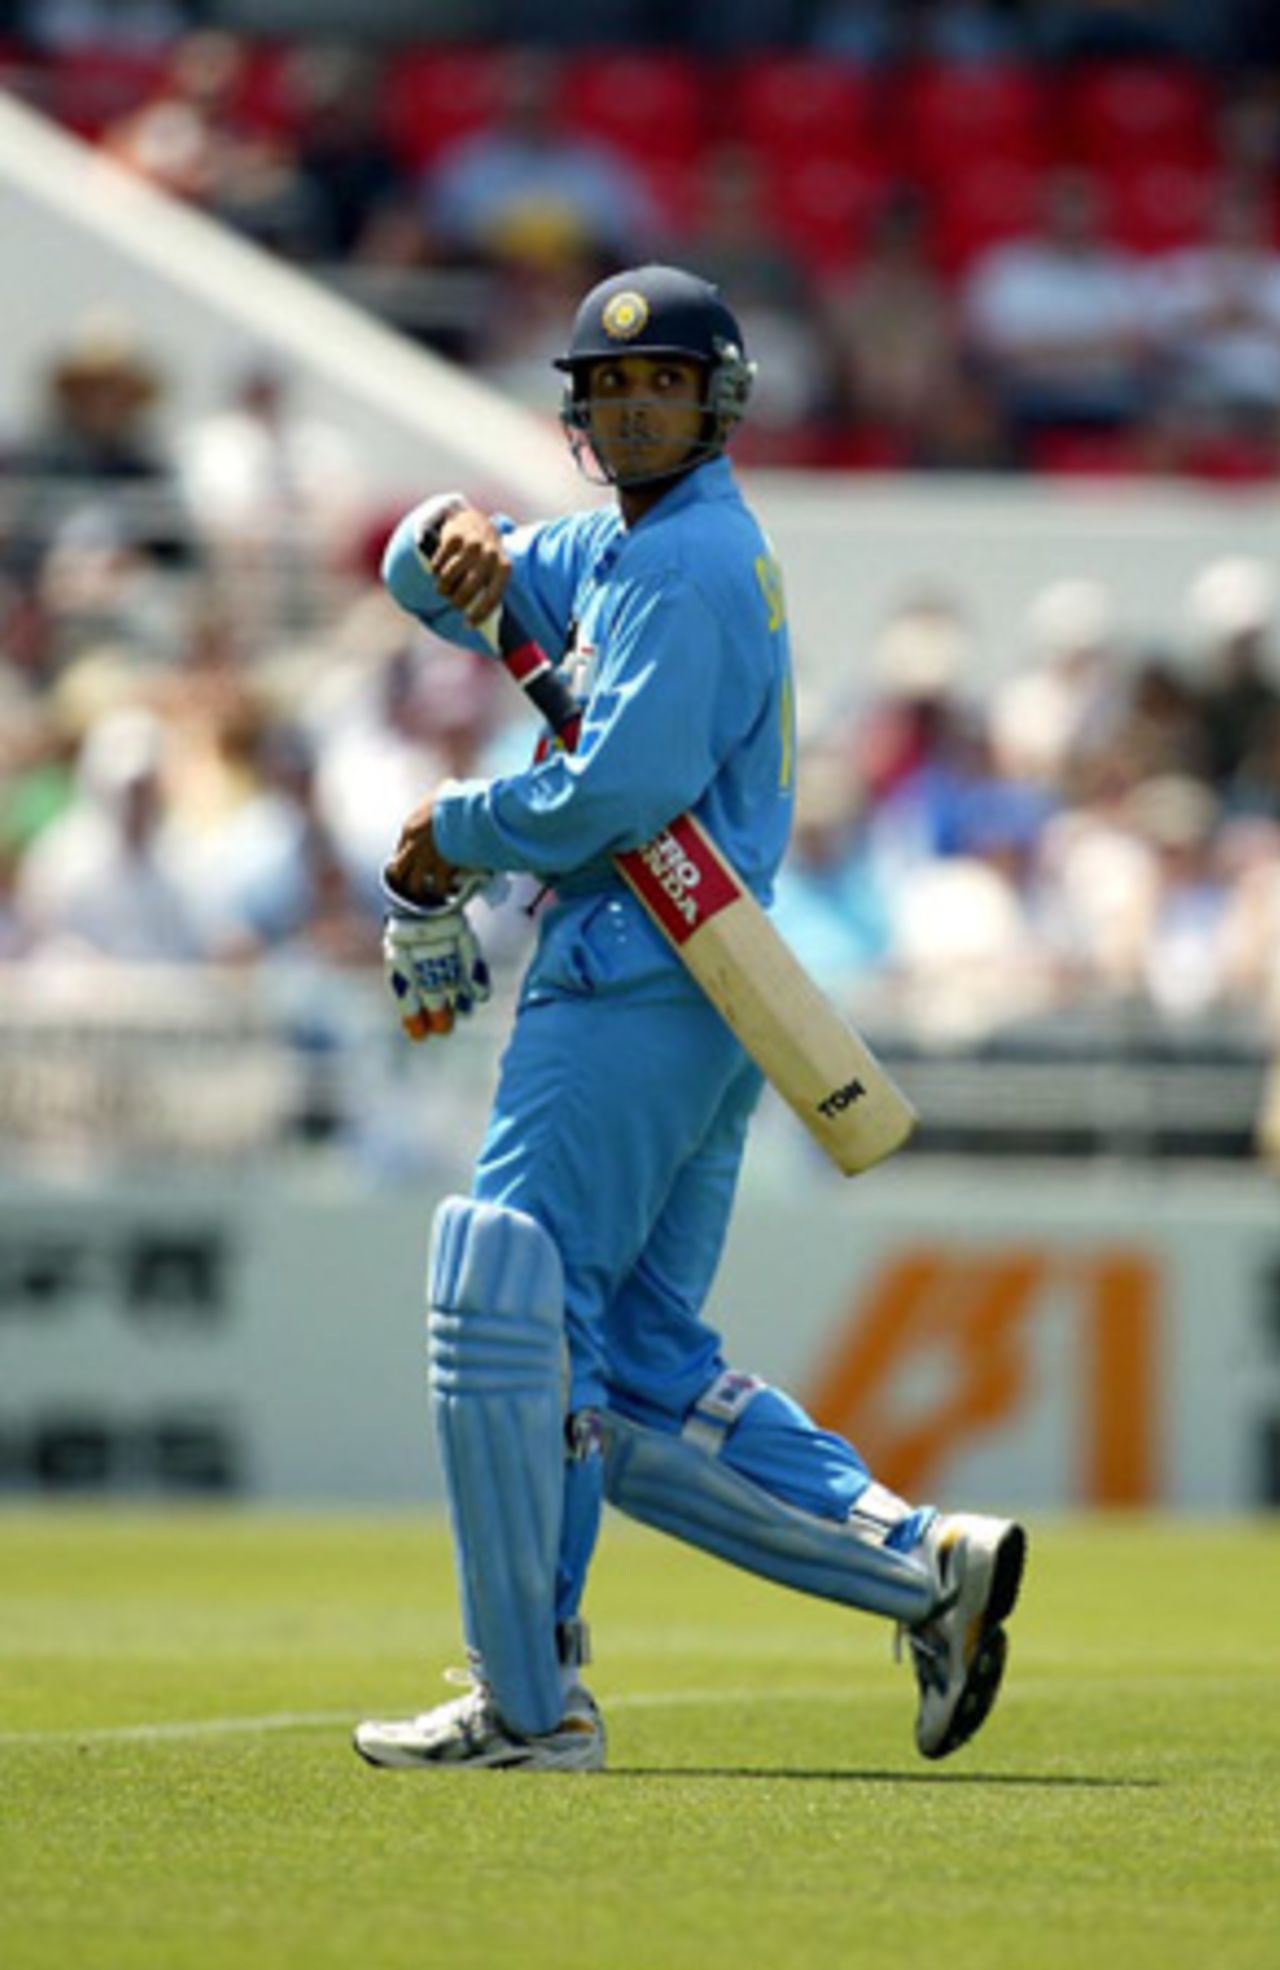 Indian batsman Sourav Ganguly looks back at the replay screen as he walks from the field after being dismissed, caught by New Zealand wicket-keeper Brendon McCullum off the bowling of Daryl Tuffey for four. 3rd ODI: New Zealand v India at Jade Stadium, Christchurch, 1 January 2003.